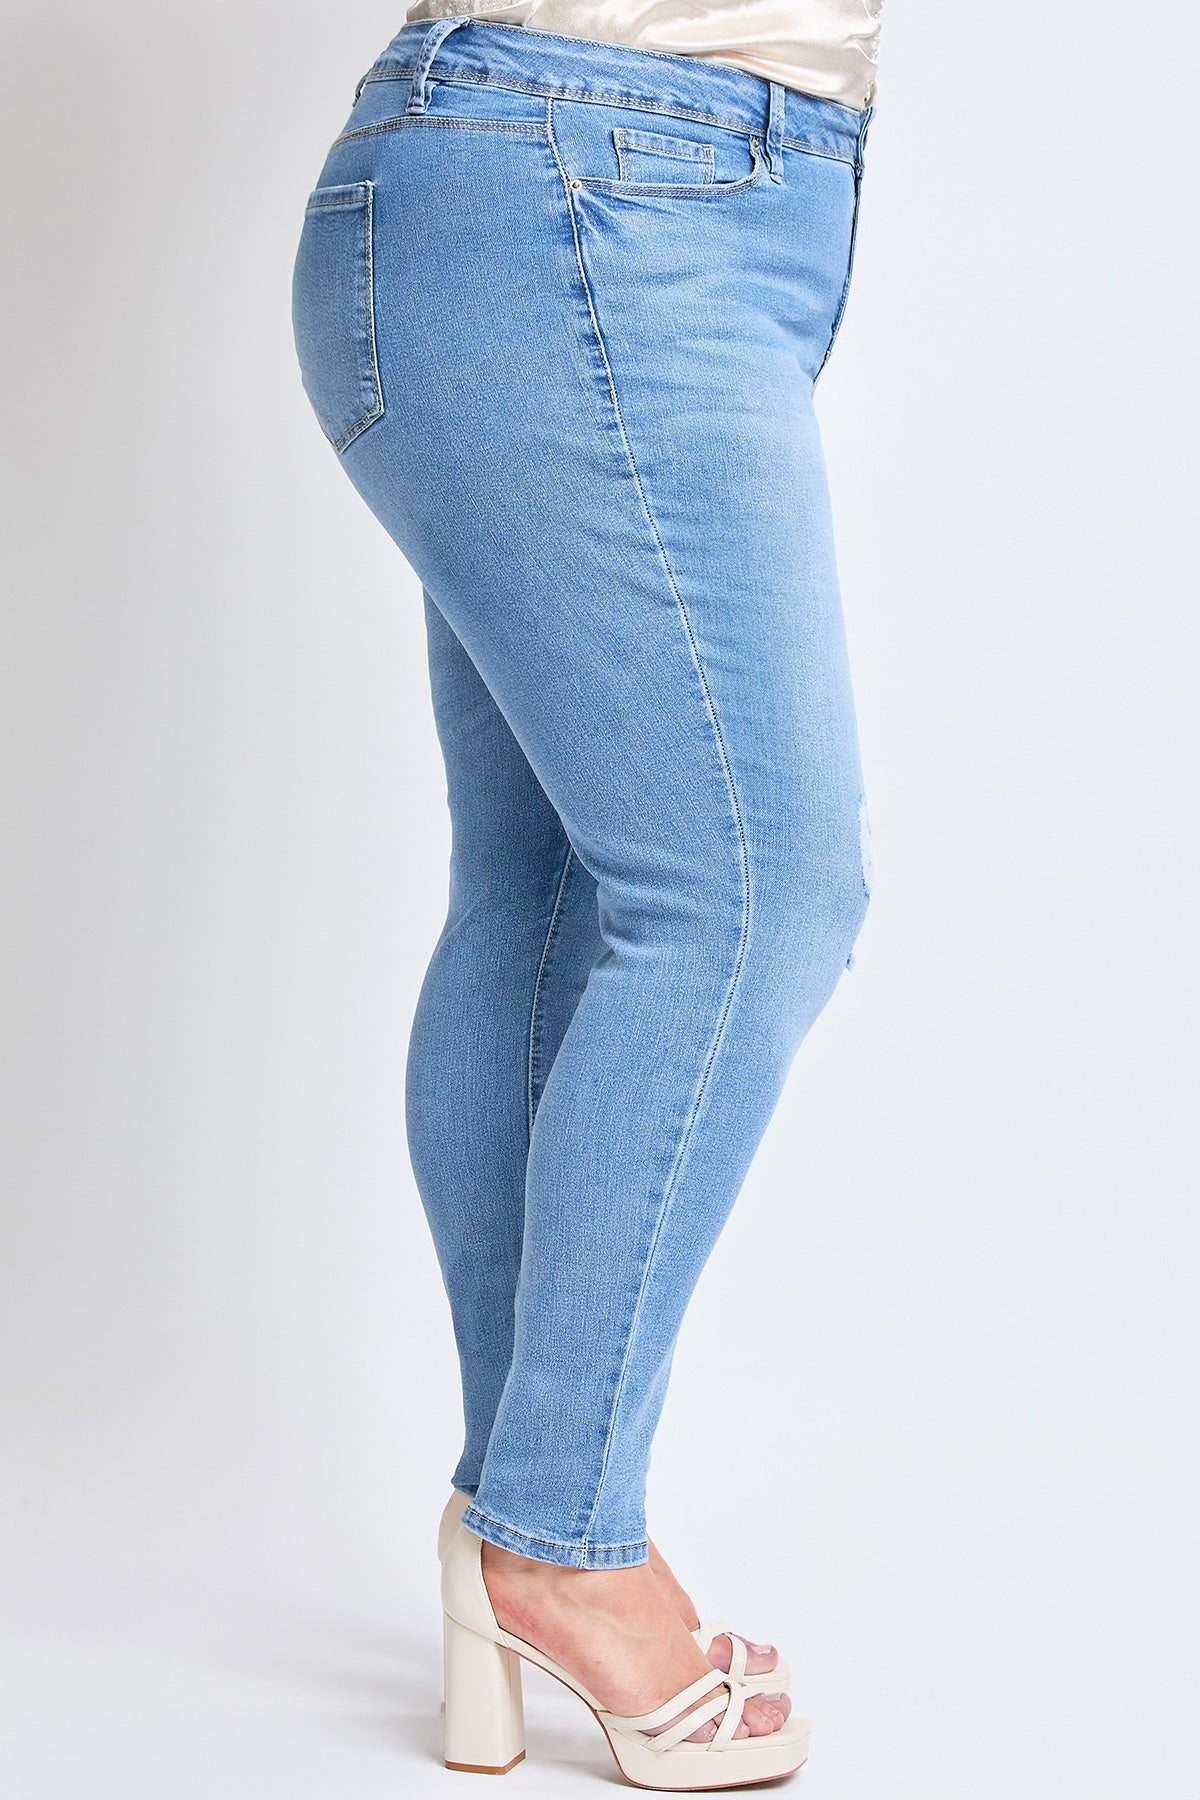 Plus Size Women's Essential Sustainable Distressed Skinny Jeans